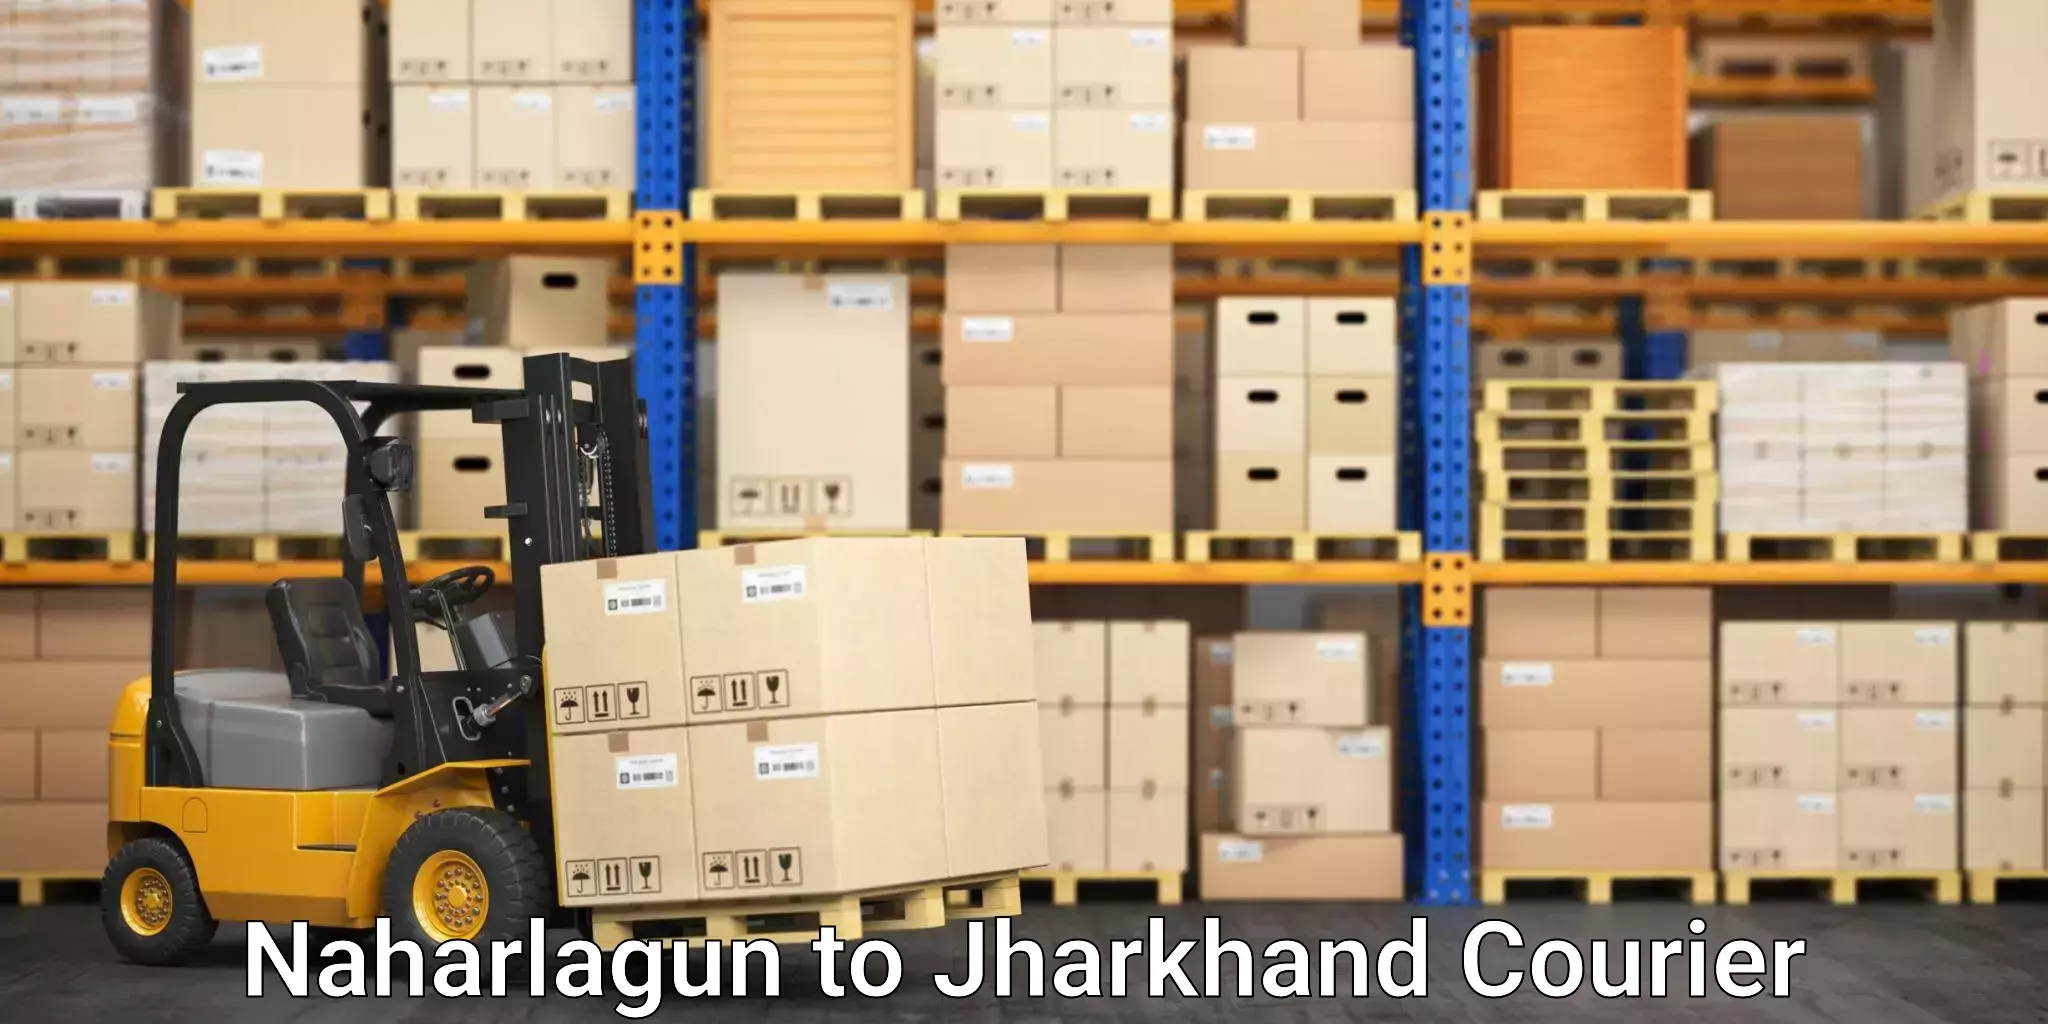 Customer-oriented courier services Naharlagun to Jharkhand